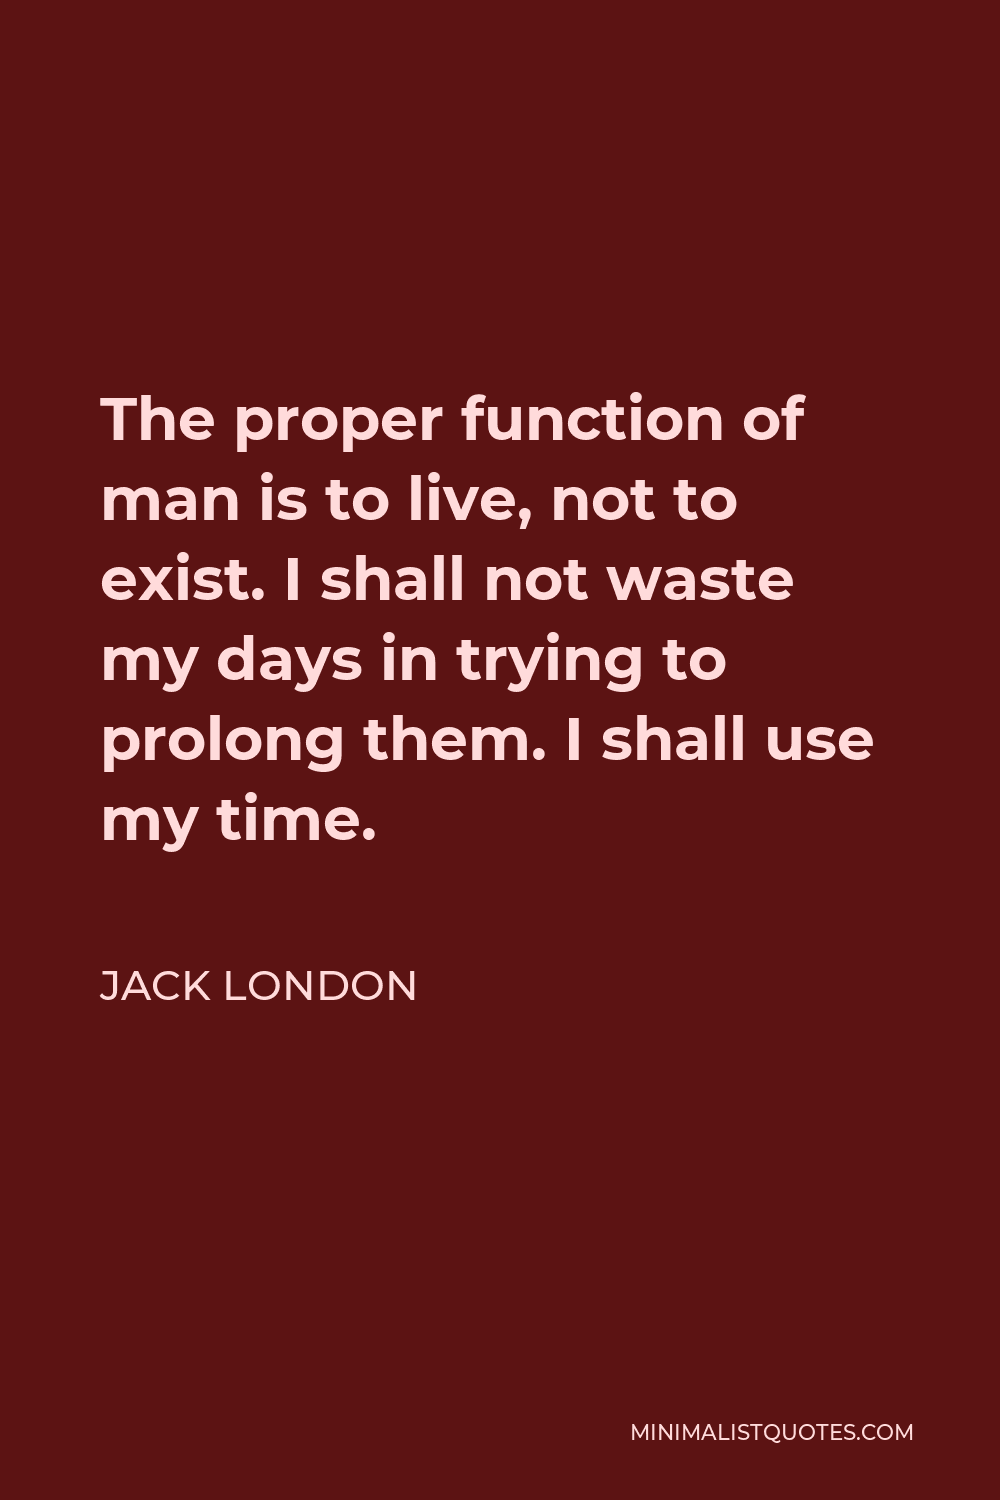 Jack London Quote - The proper function of man is to live, not to exist. I shall not waste my days in trying to prolong them. I shall use my time.